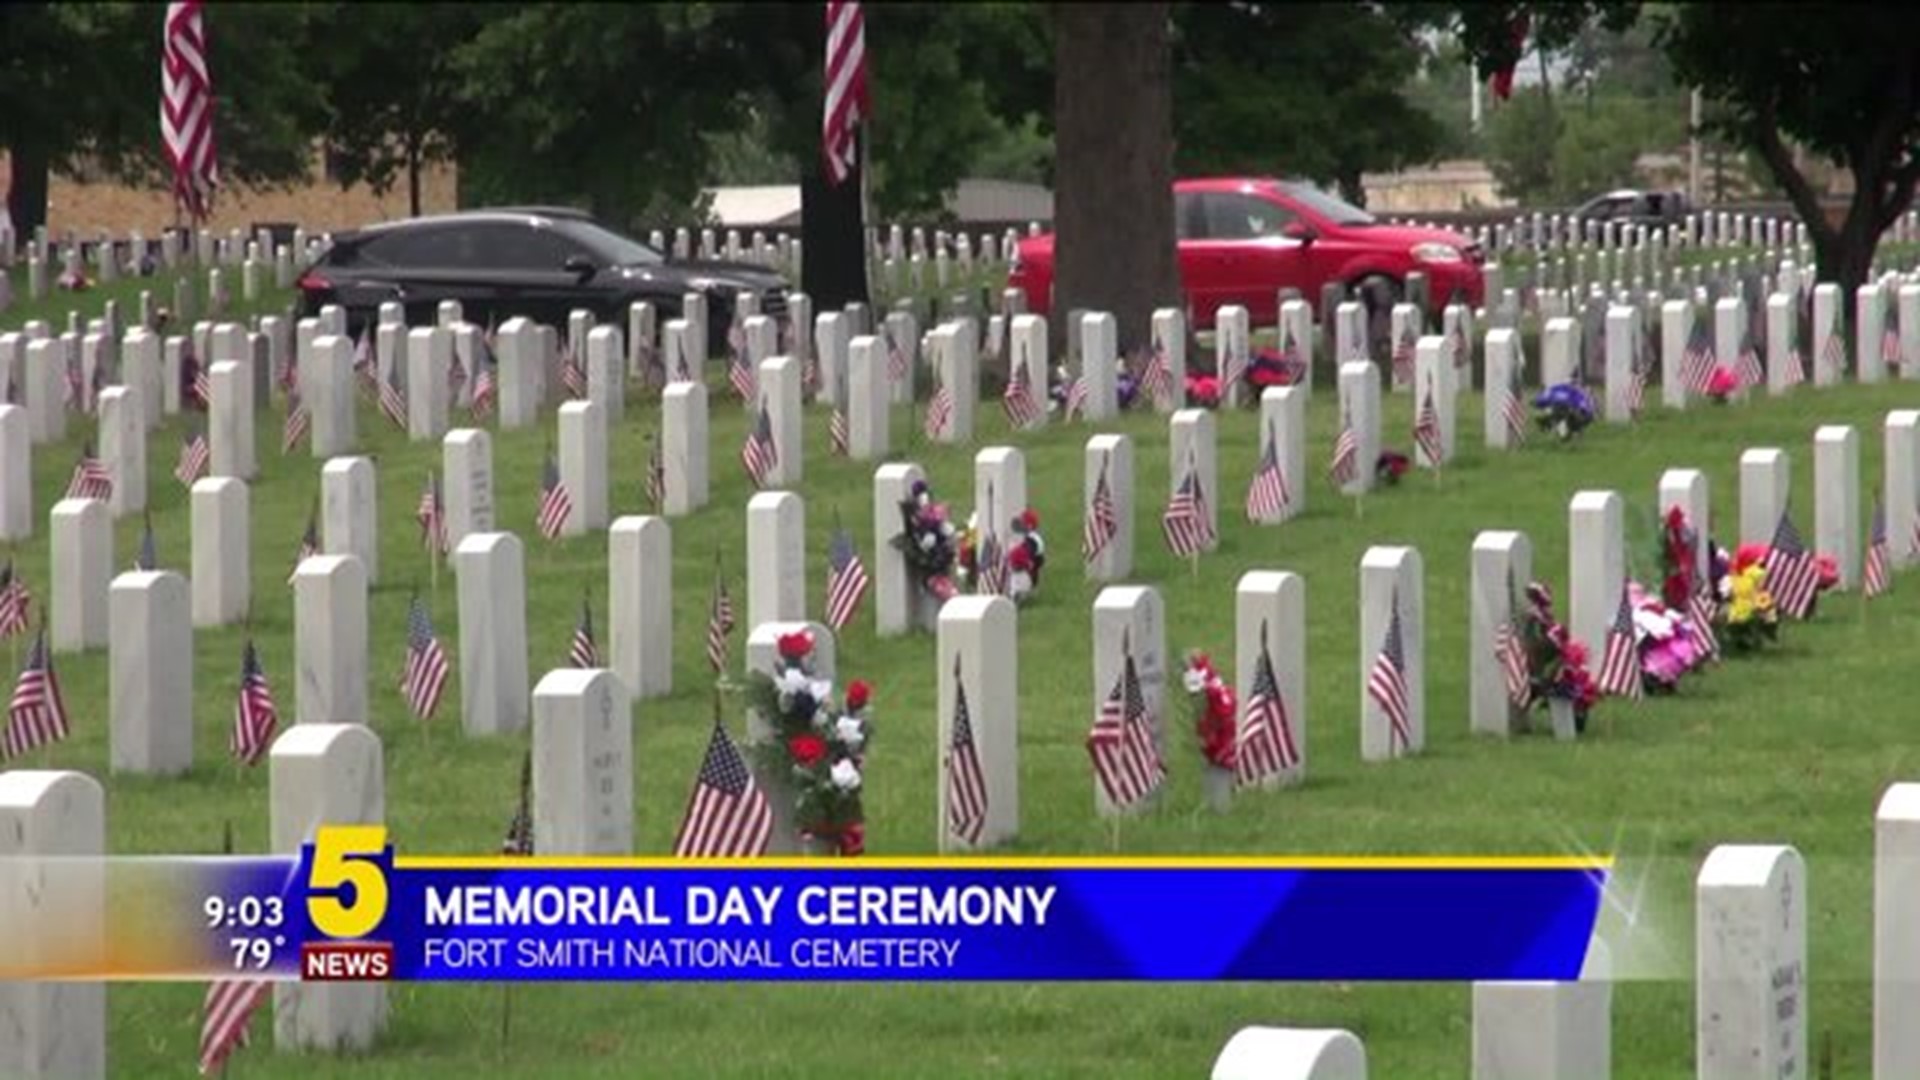 MEMORIAL DAY CEREMONY AT THE NATIONAL CEMETERY